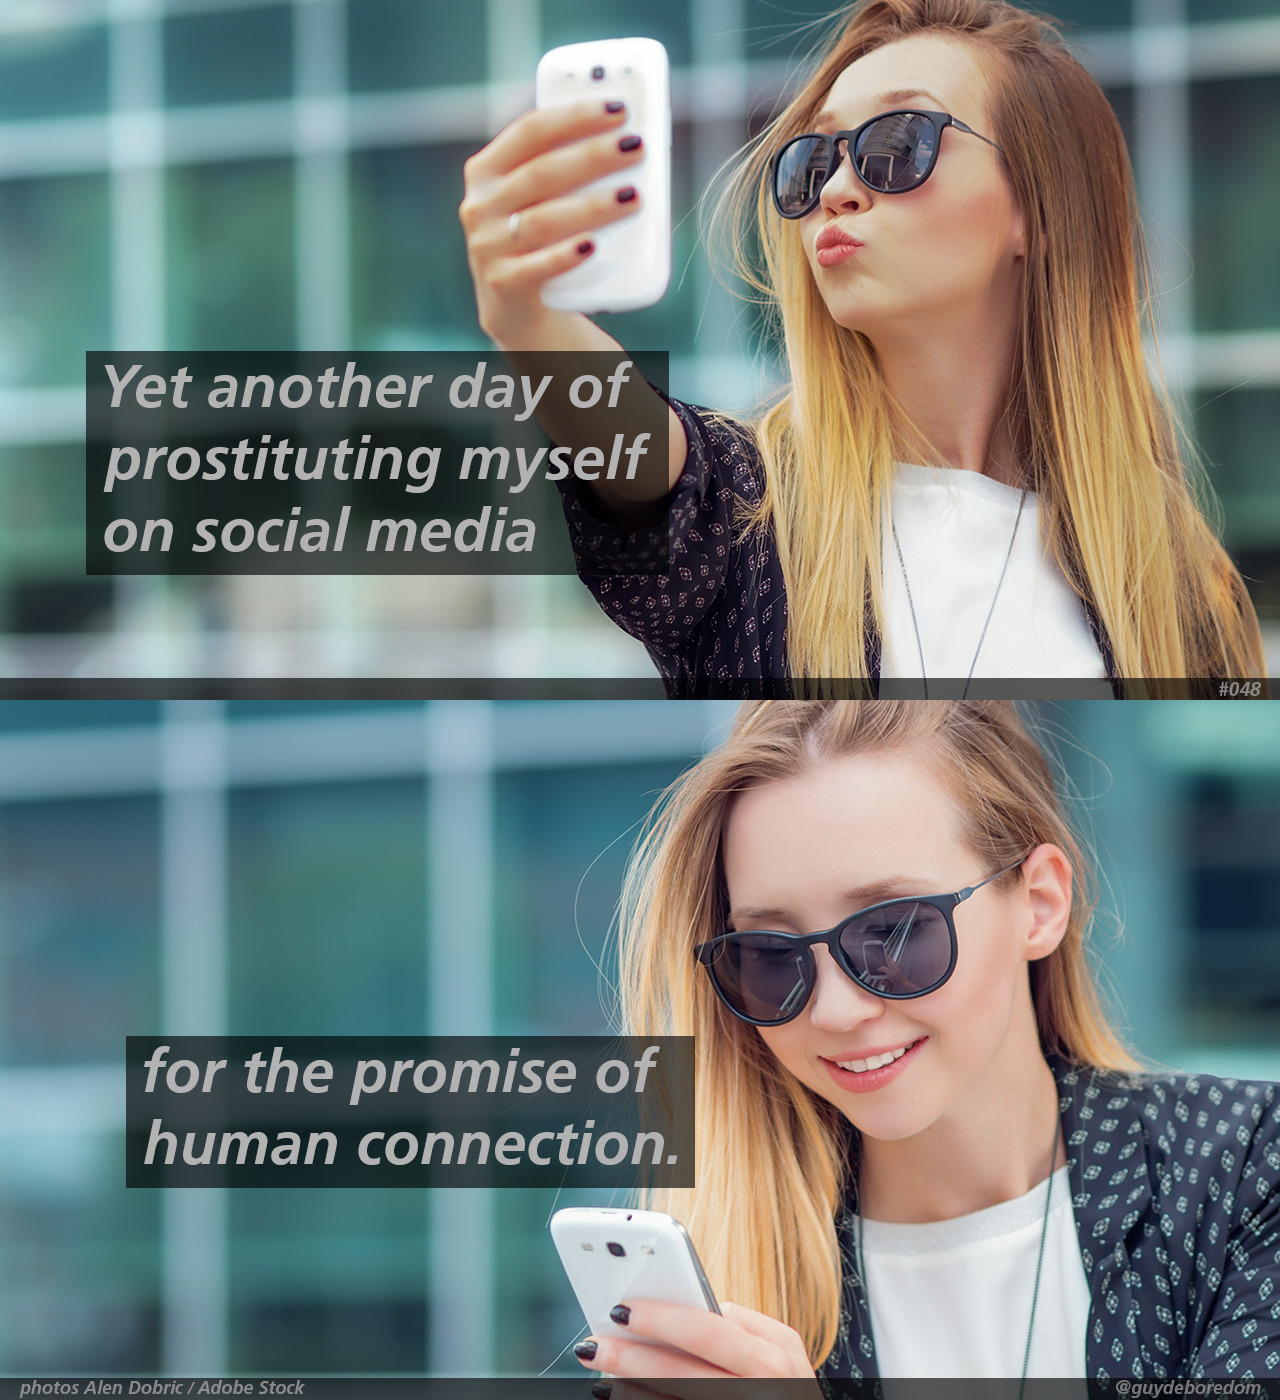 Yet another day of prostituting myself on social media for the promise of human connection.